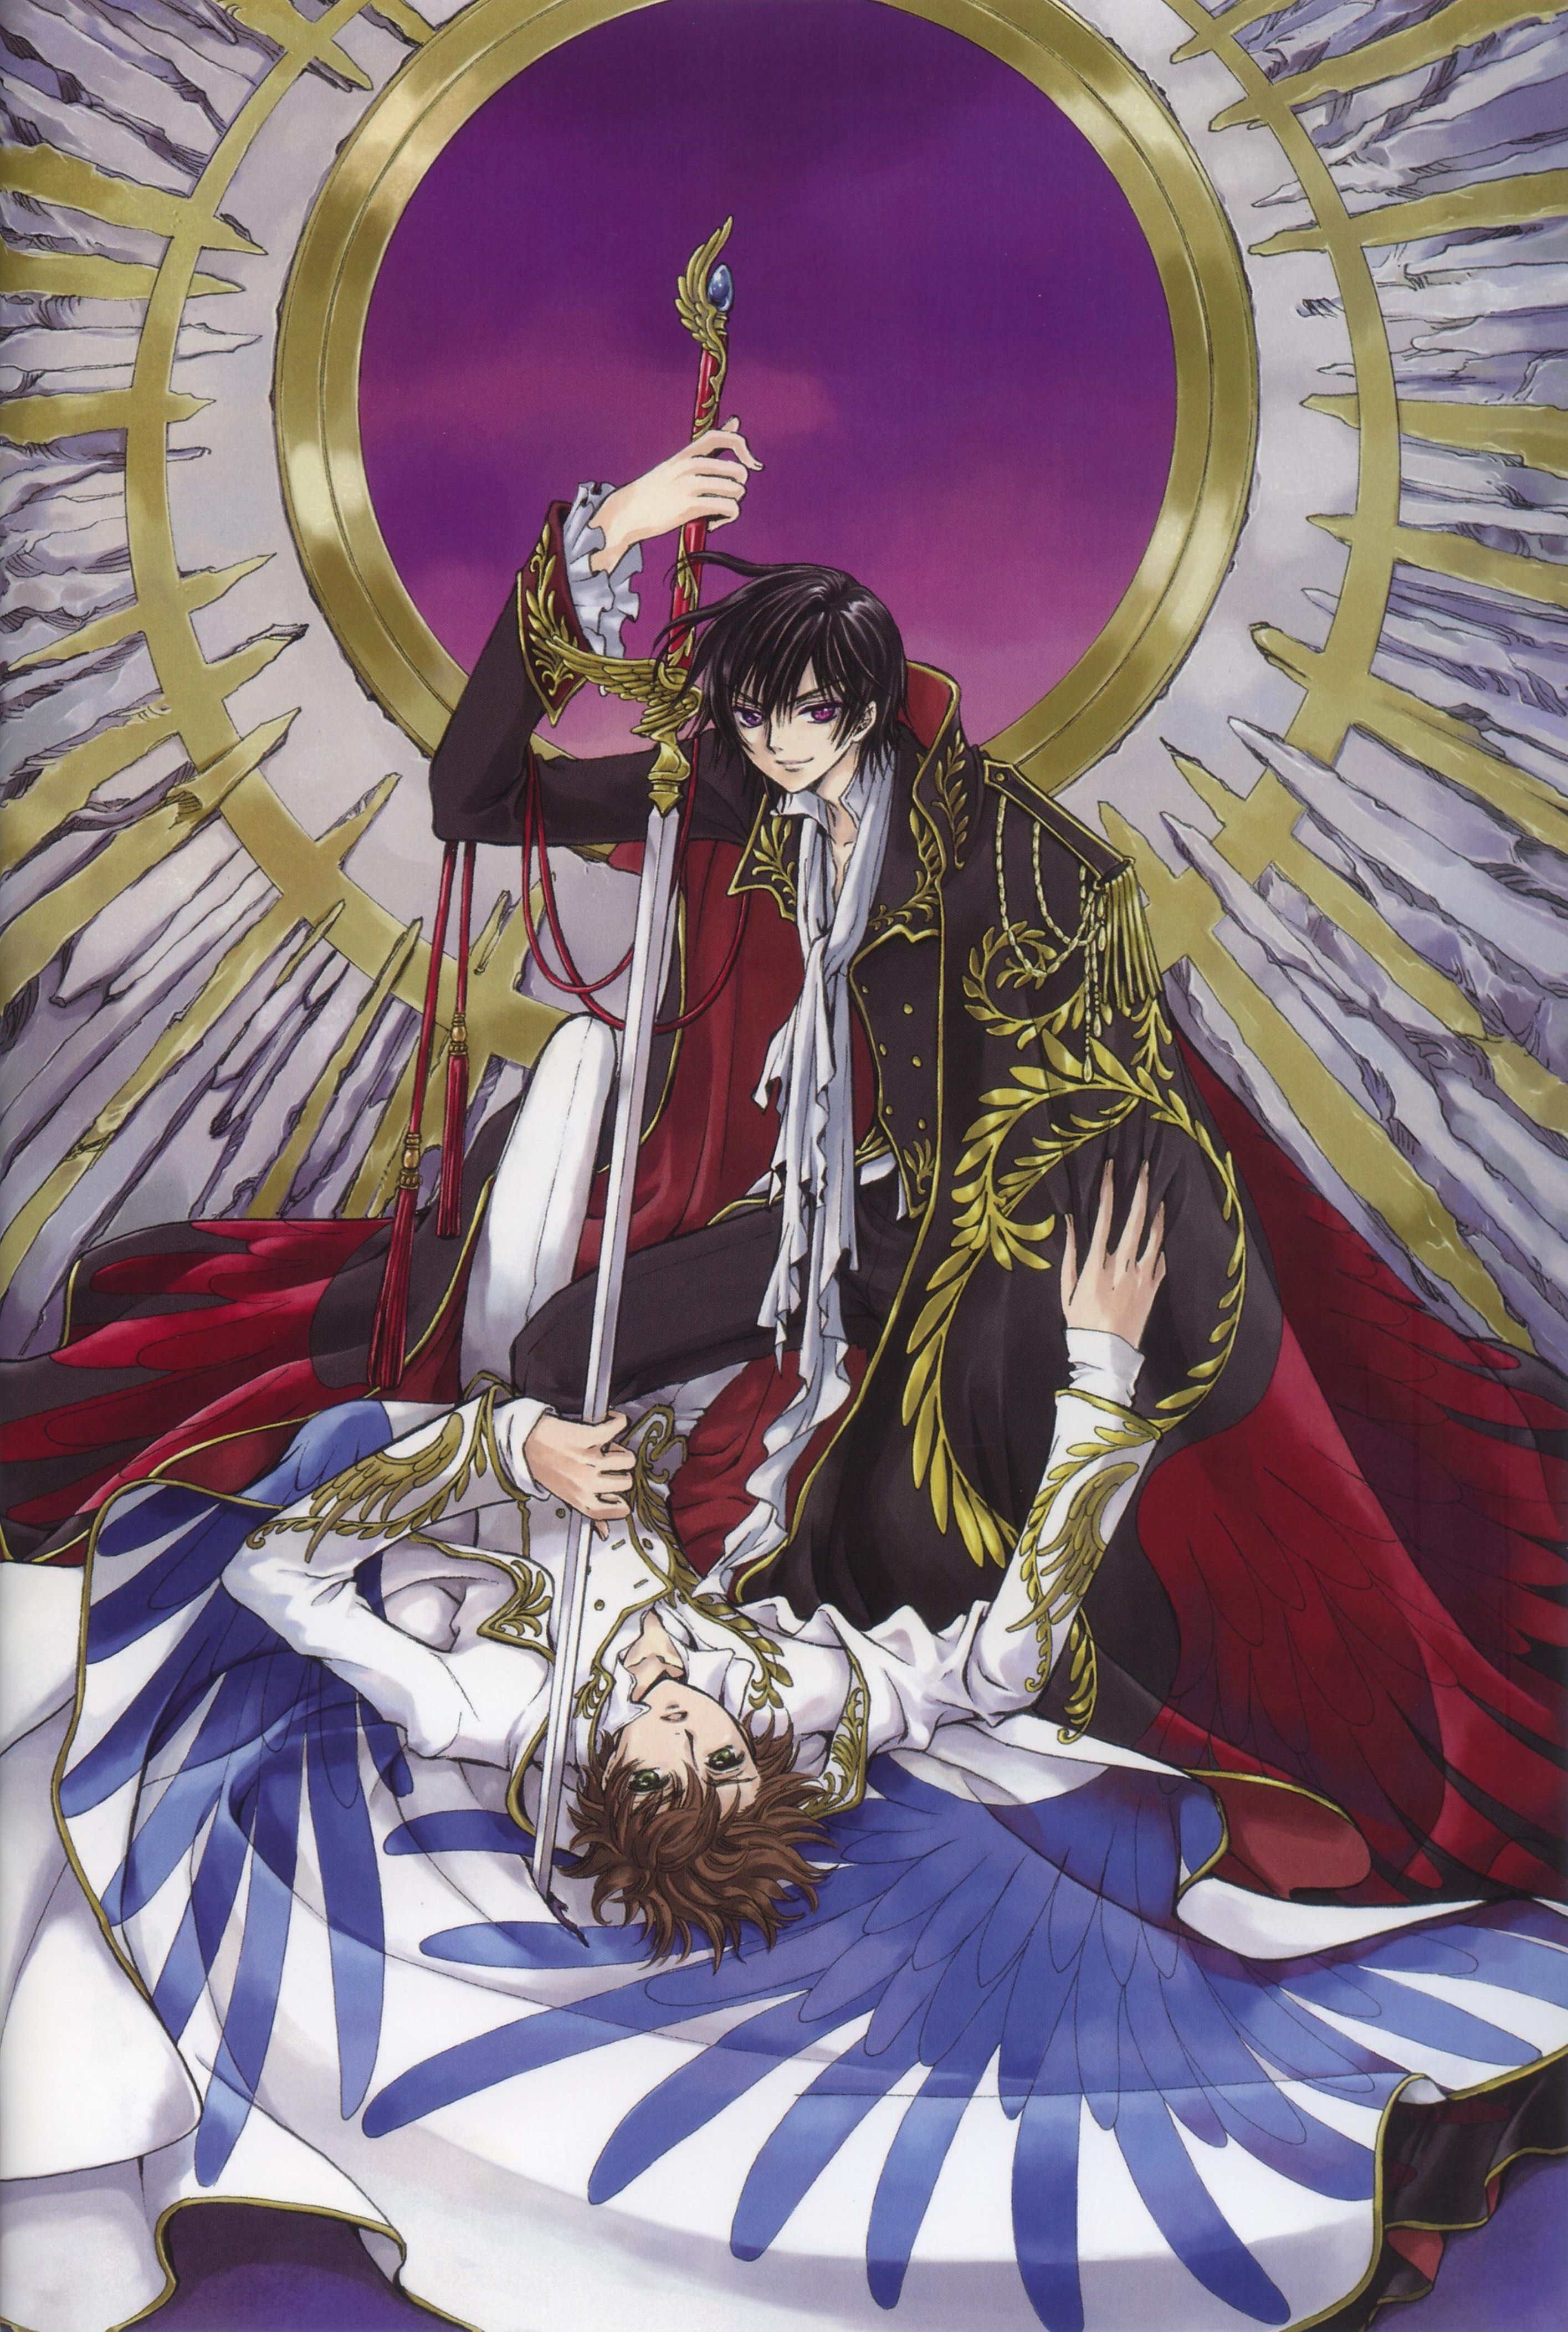 Lelouch And Suzaku Clash In Code Geass Illustration By Clamp